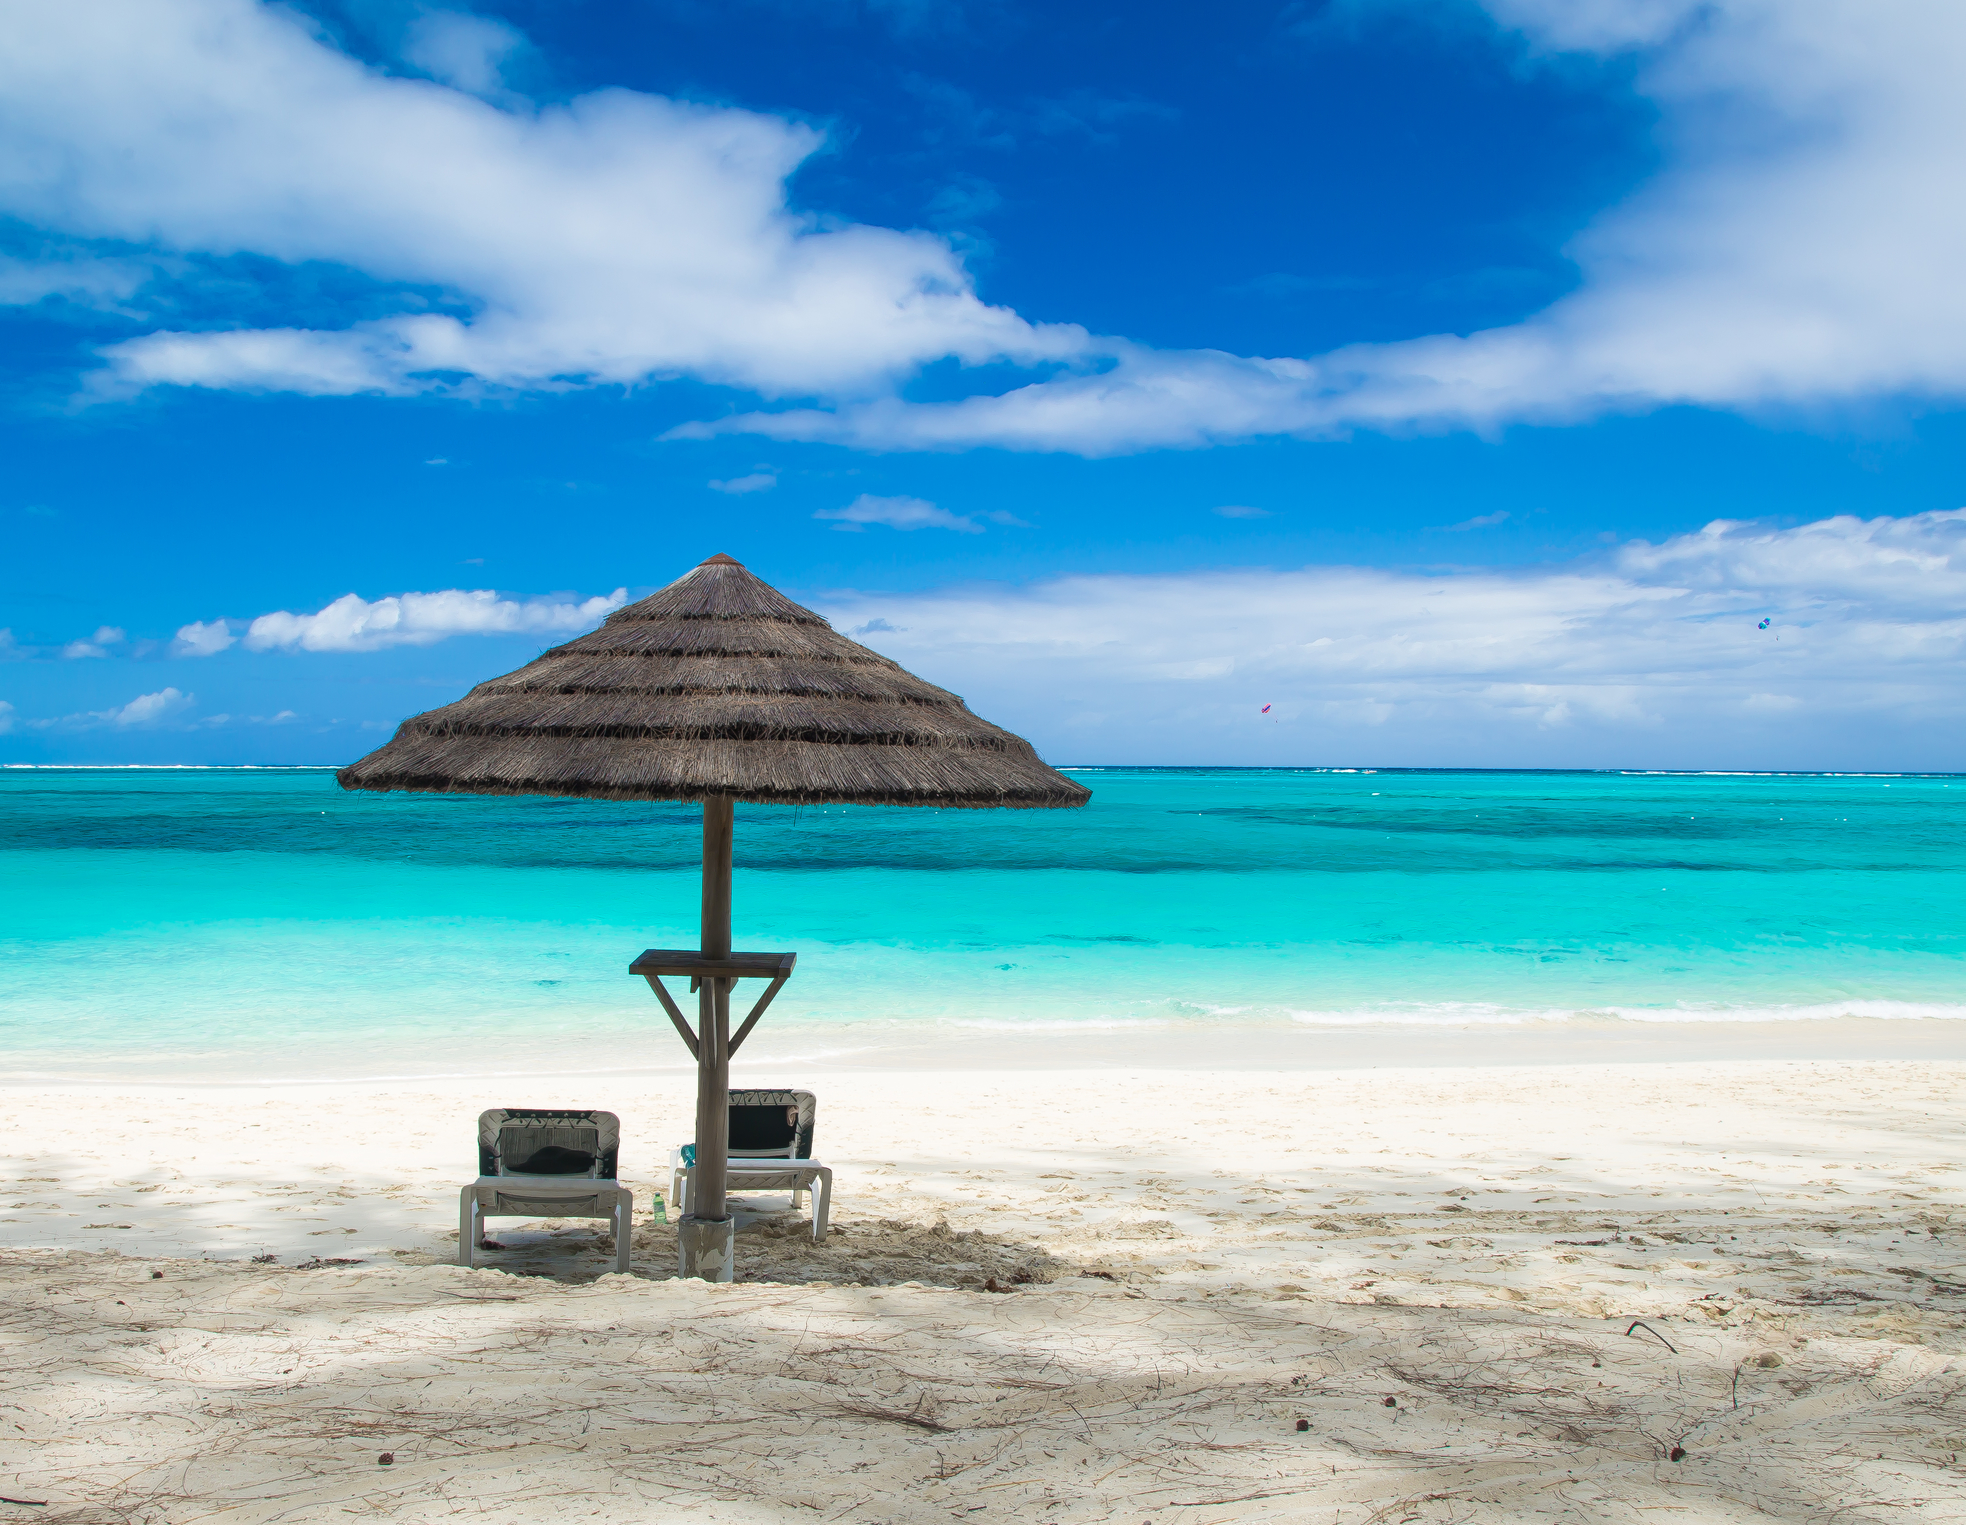 Southwest Airlines flights to Turks & Caicos from $69 one-way!